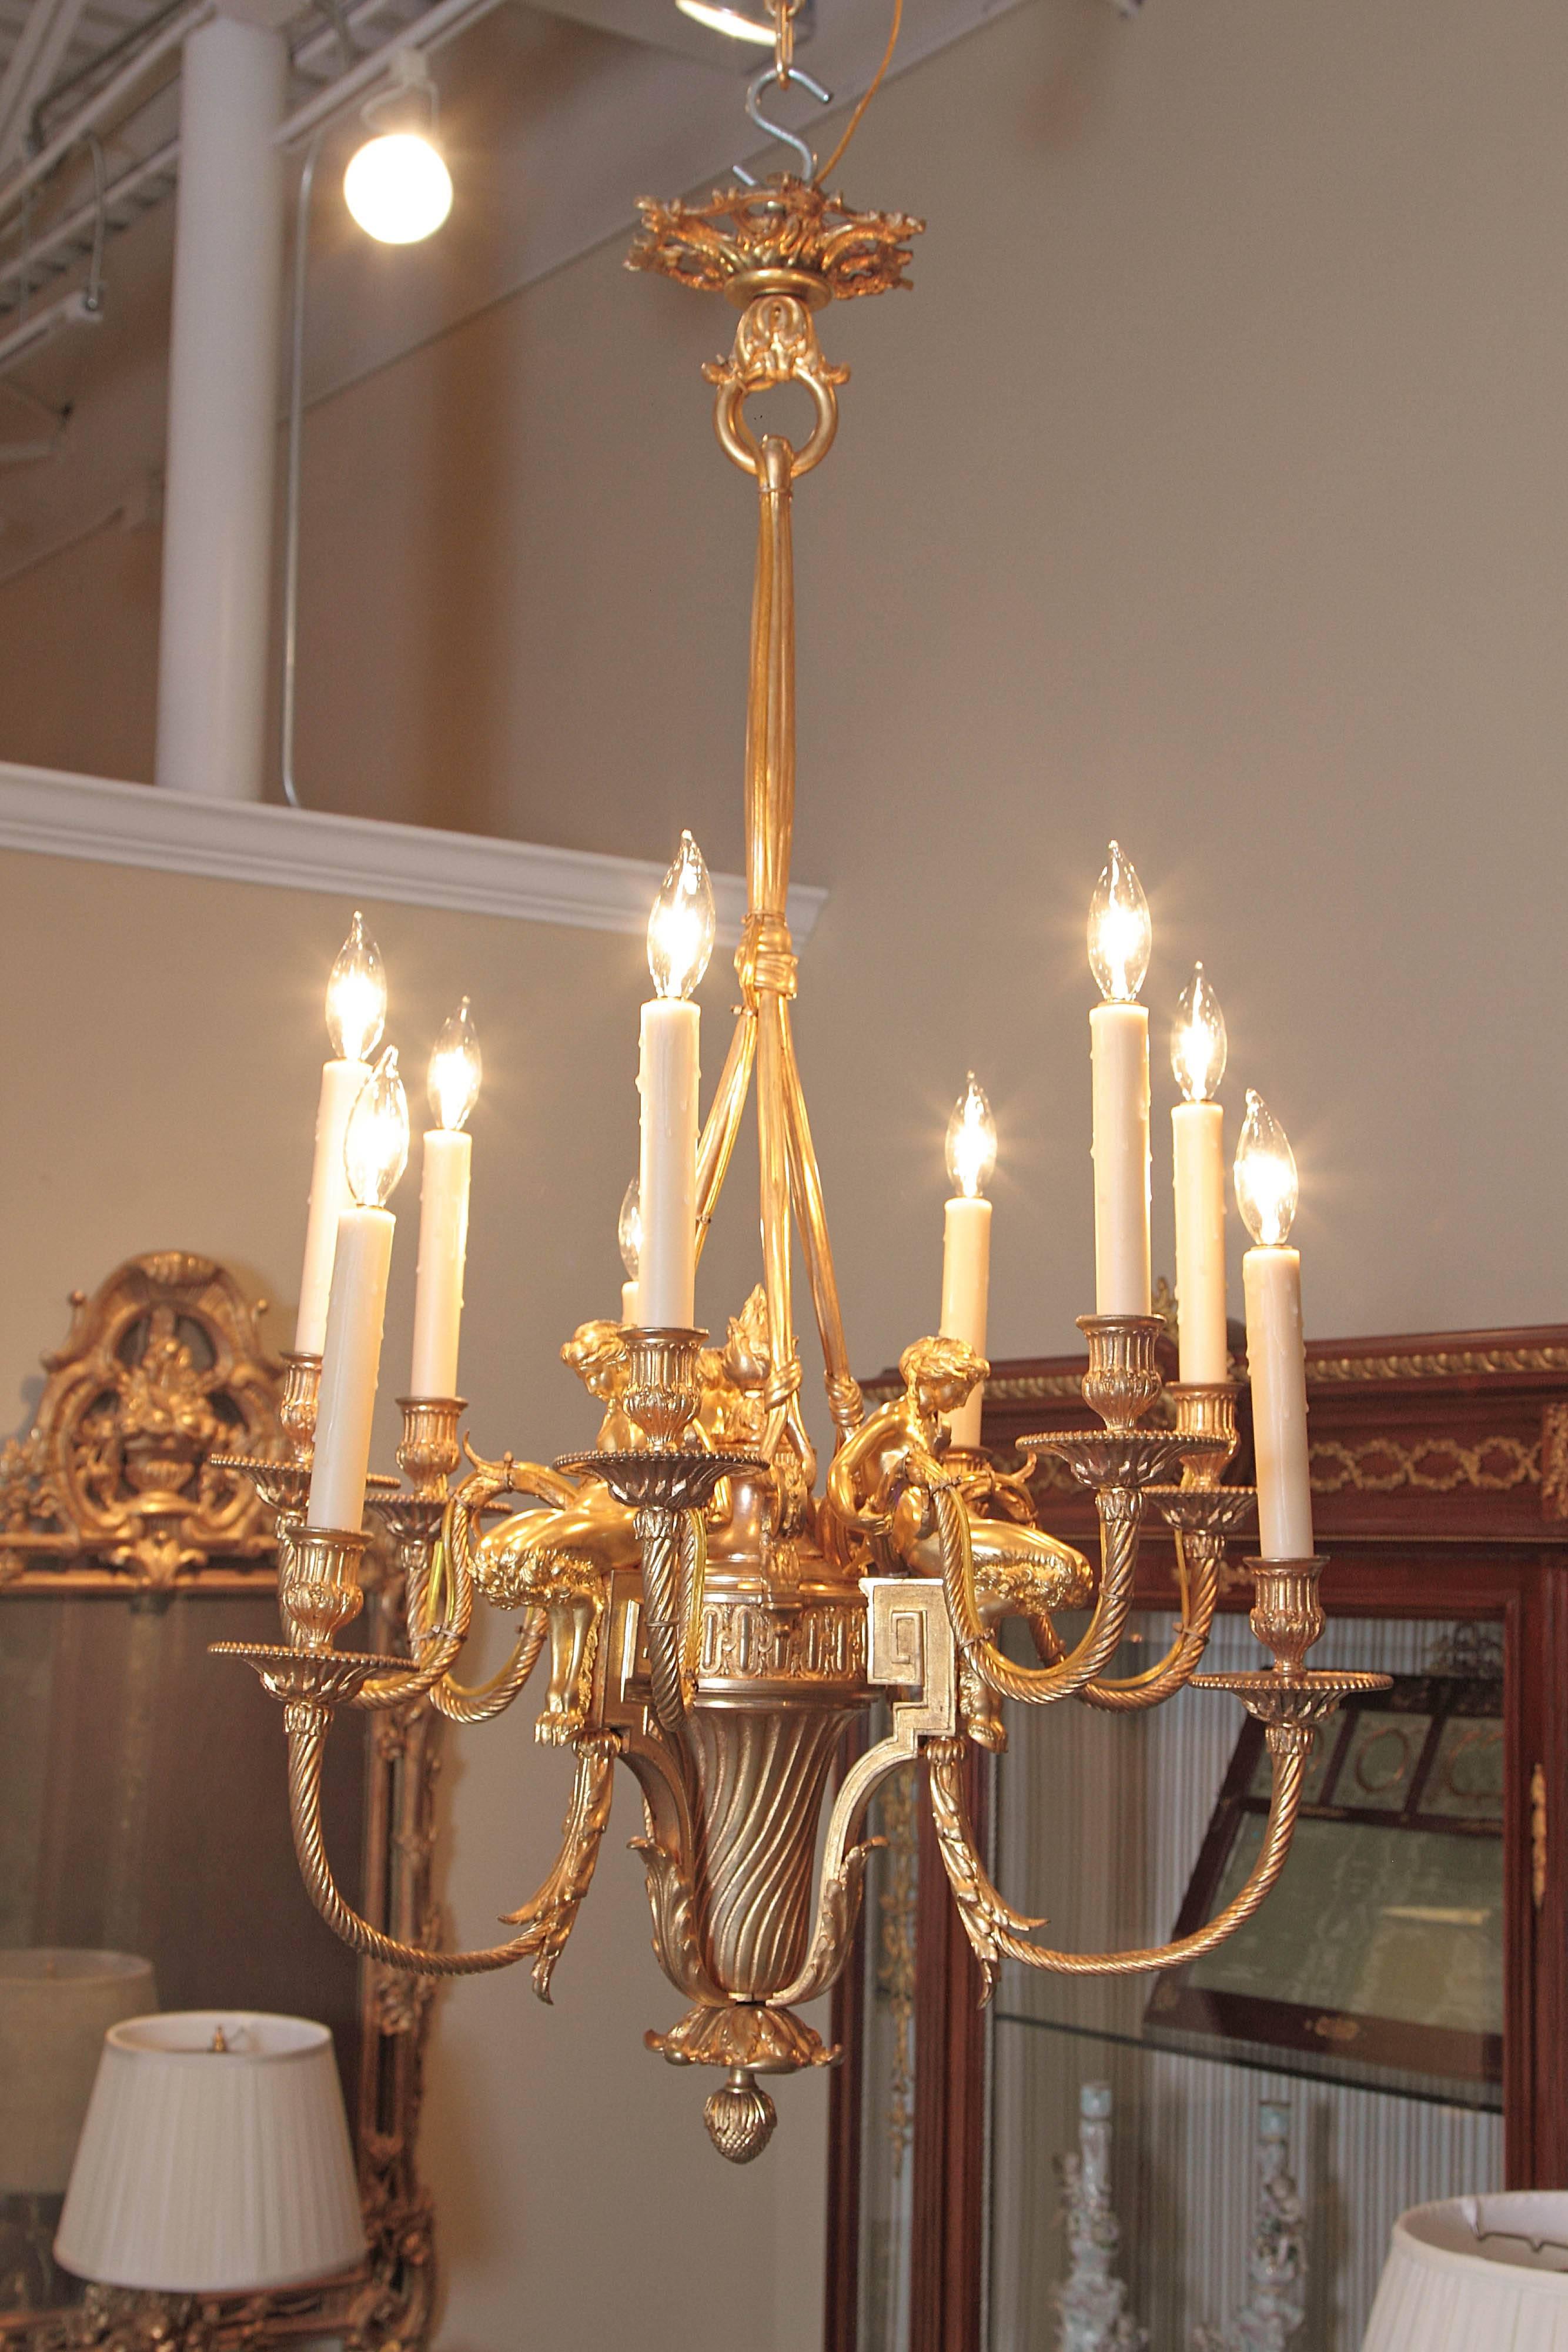 19th century French Louis XVI gilt bronze chandelier. Fine quality gilt bronze detail with female figures seated on top.